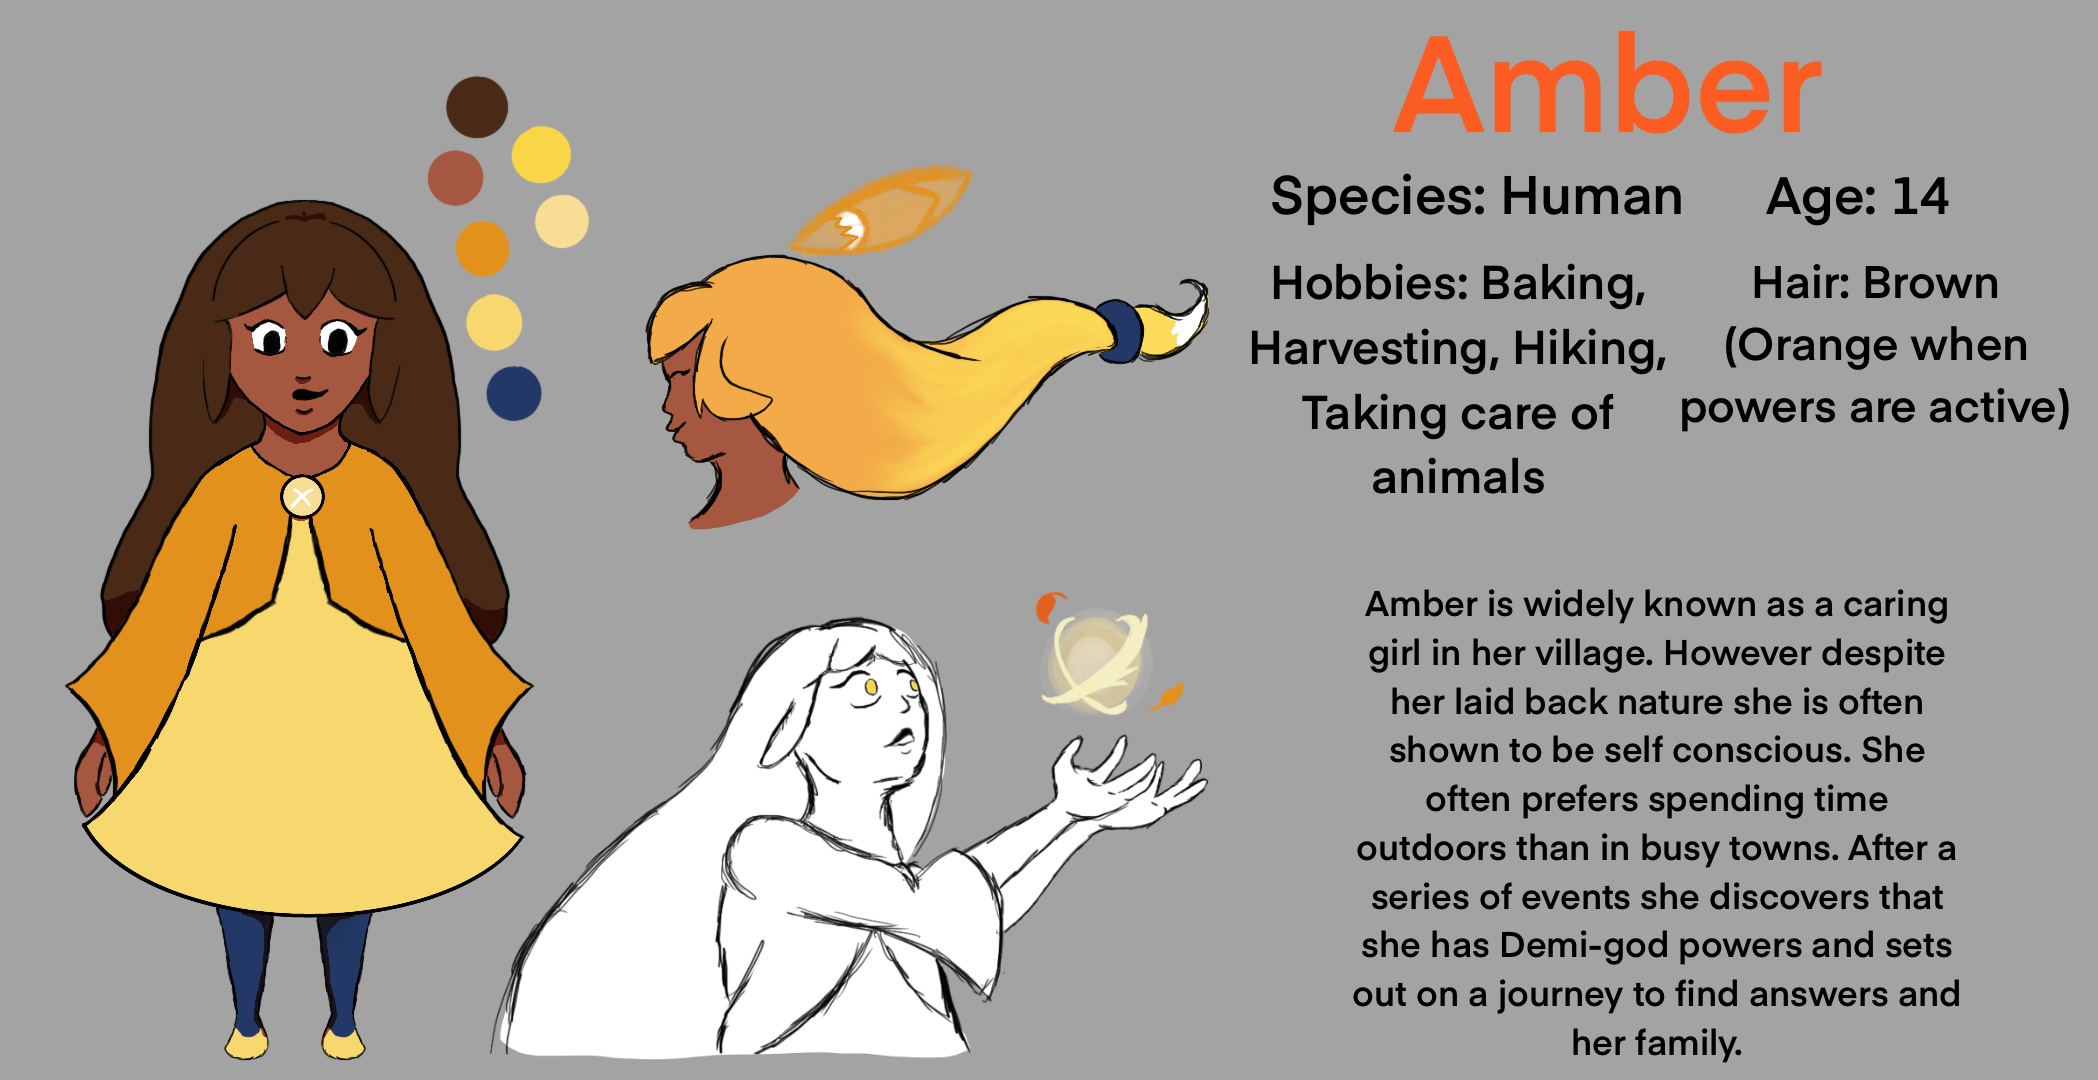 A character page giving a brief description of Amber's appearance and backstory.